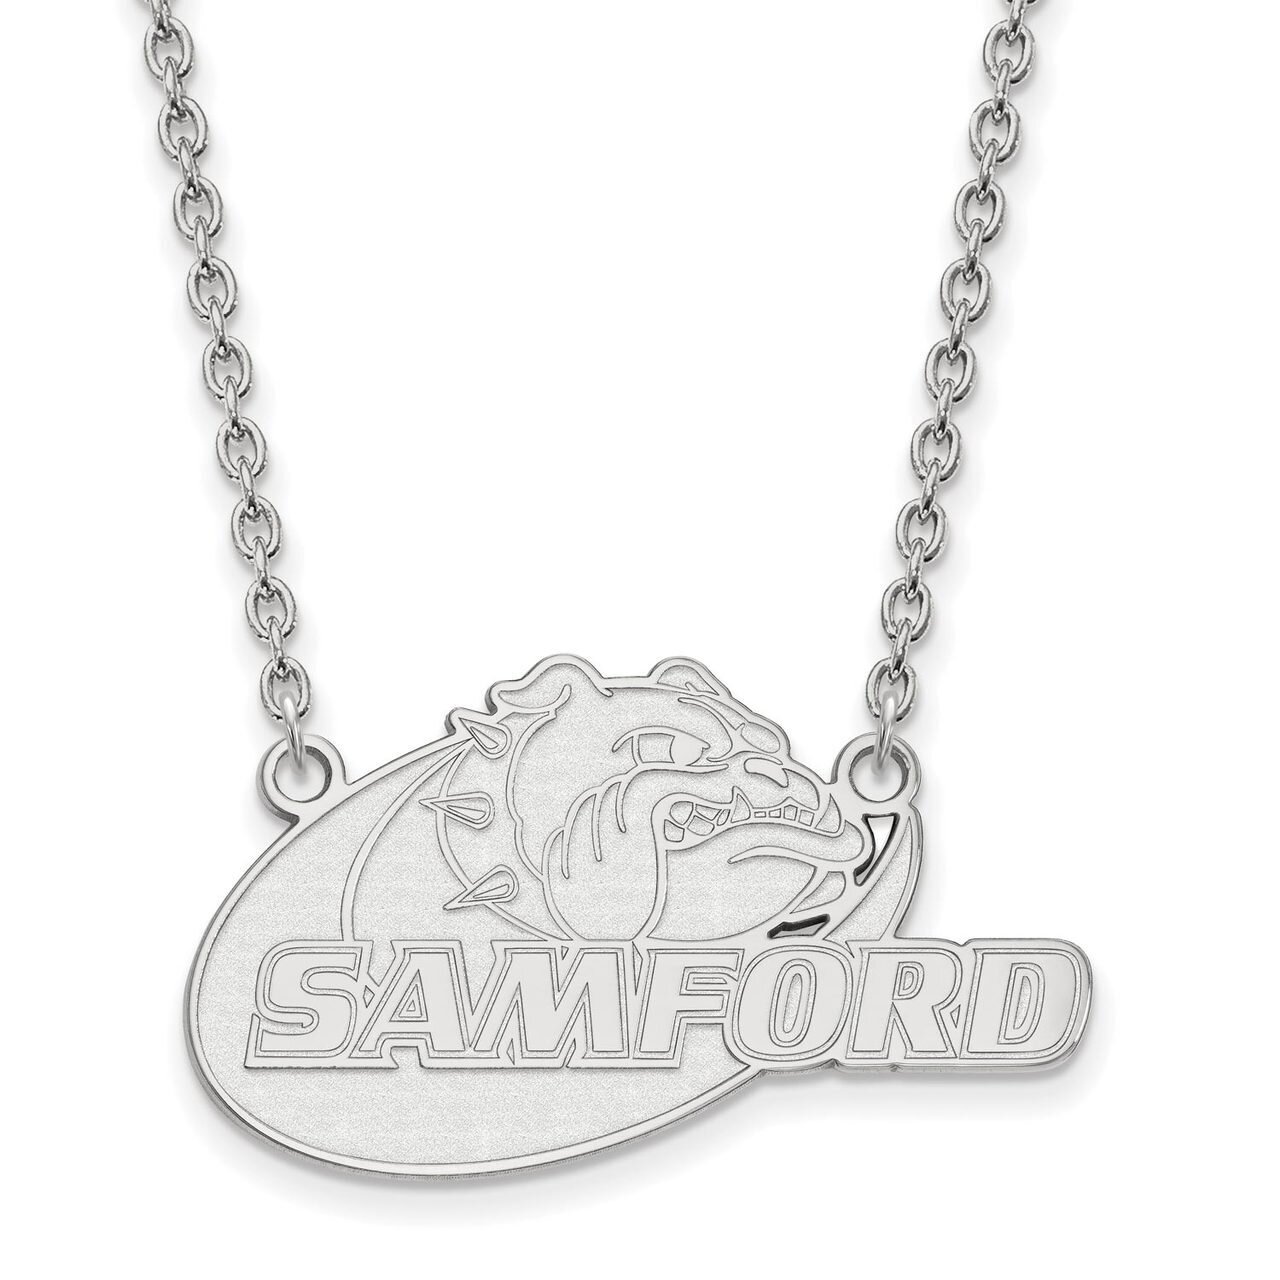 Samford University Large Pendant with Chain Necklace 10k White Gold 1W008SMF-18